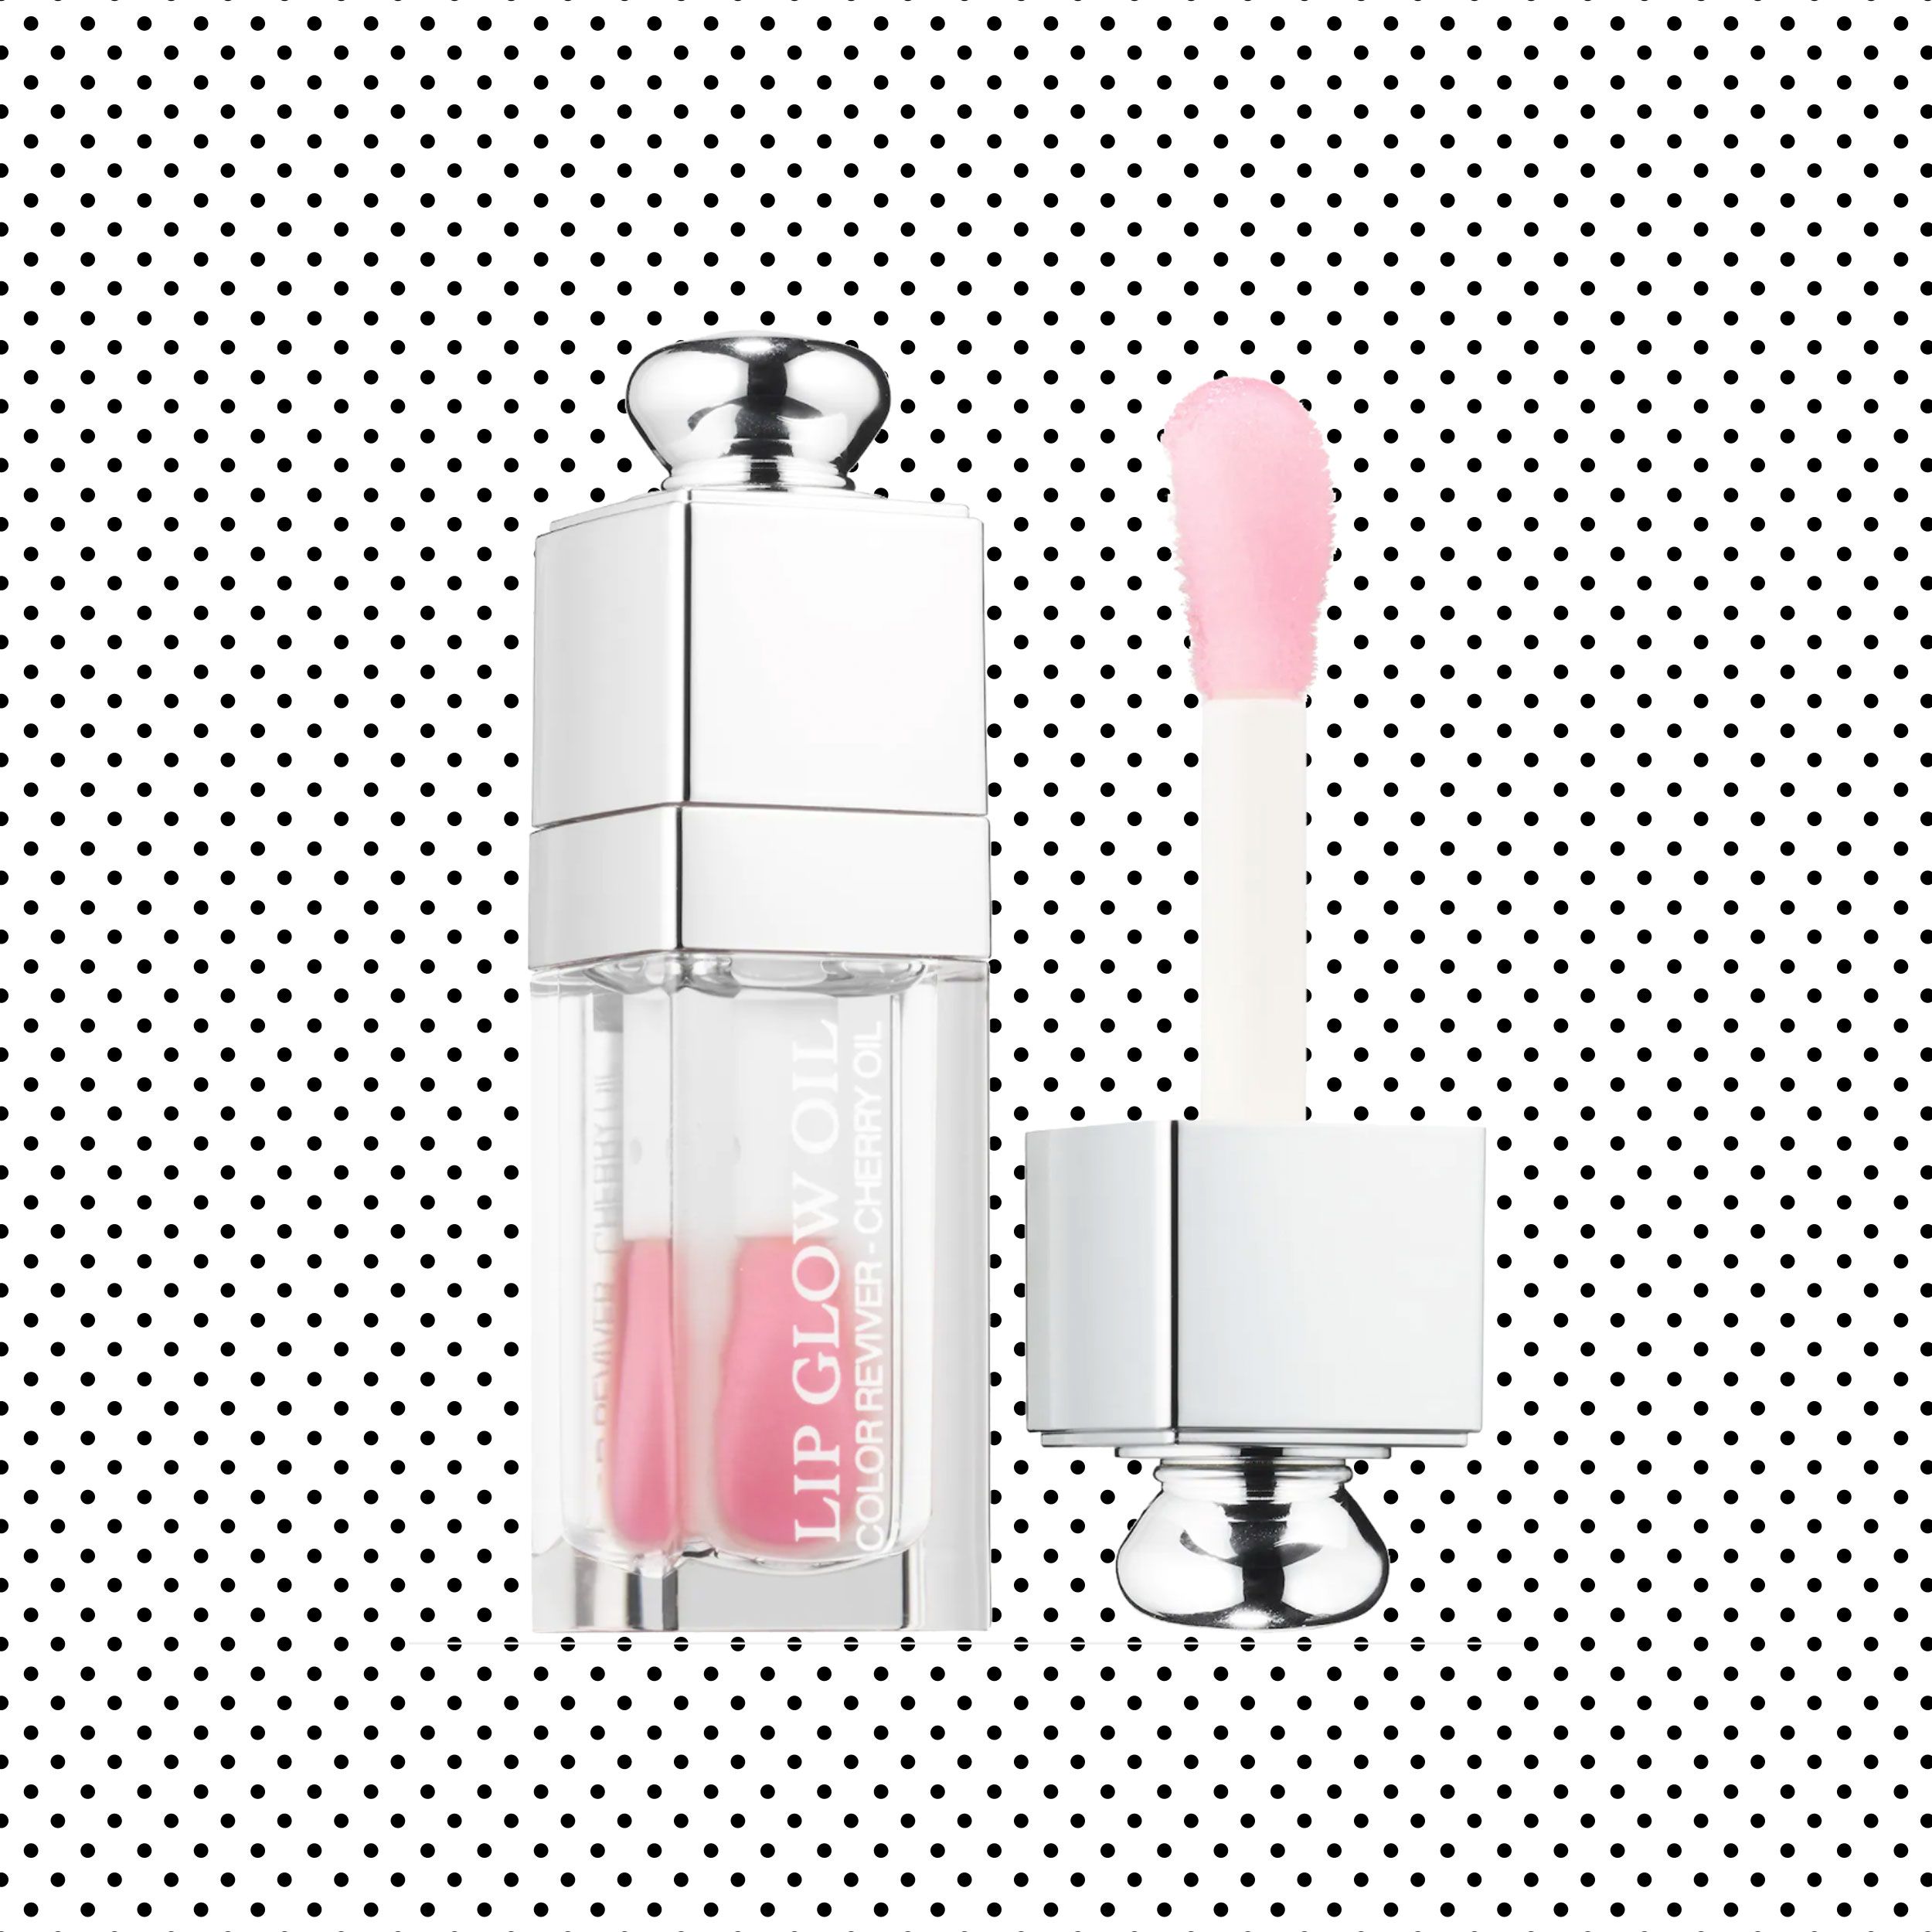 Diors TikTokFamous Lip Glow Oil Is on Sale at Nordstrom Today  WWD